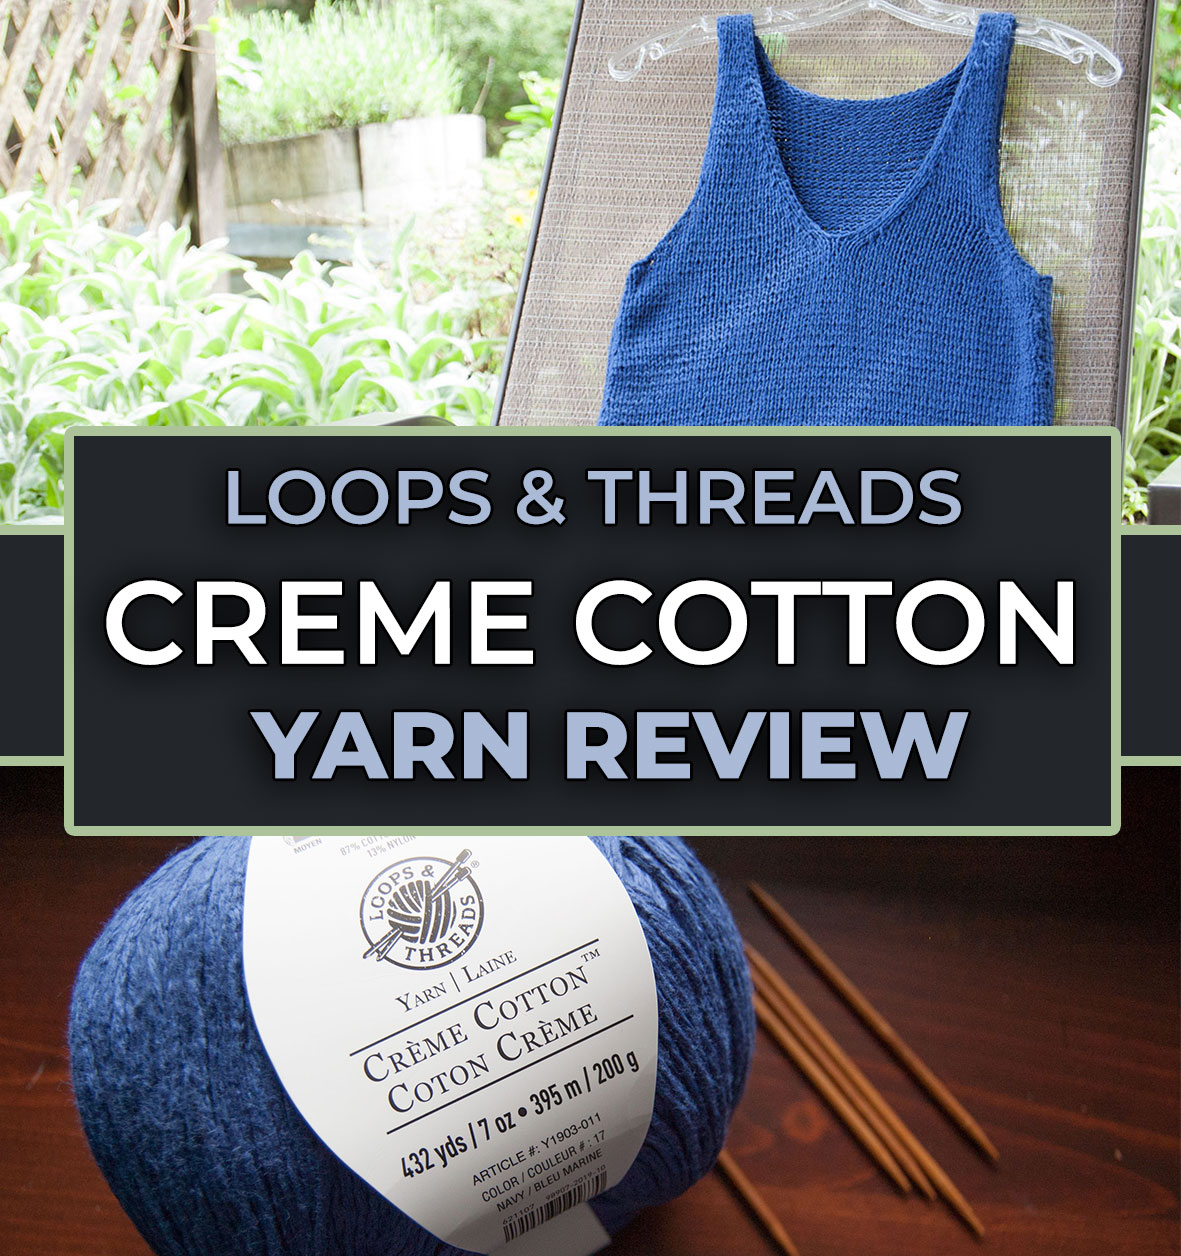 Cotton Yarns Perfect for Spring and Summer, 24/7 Cotton by Lion